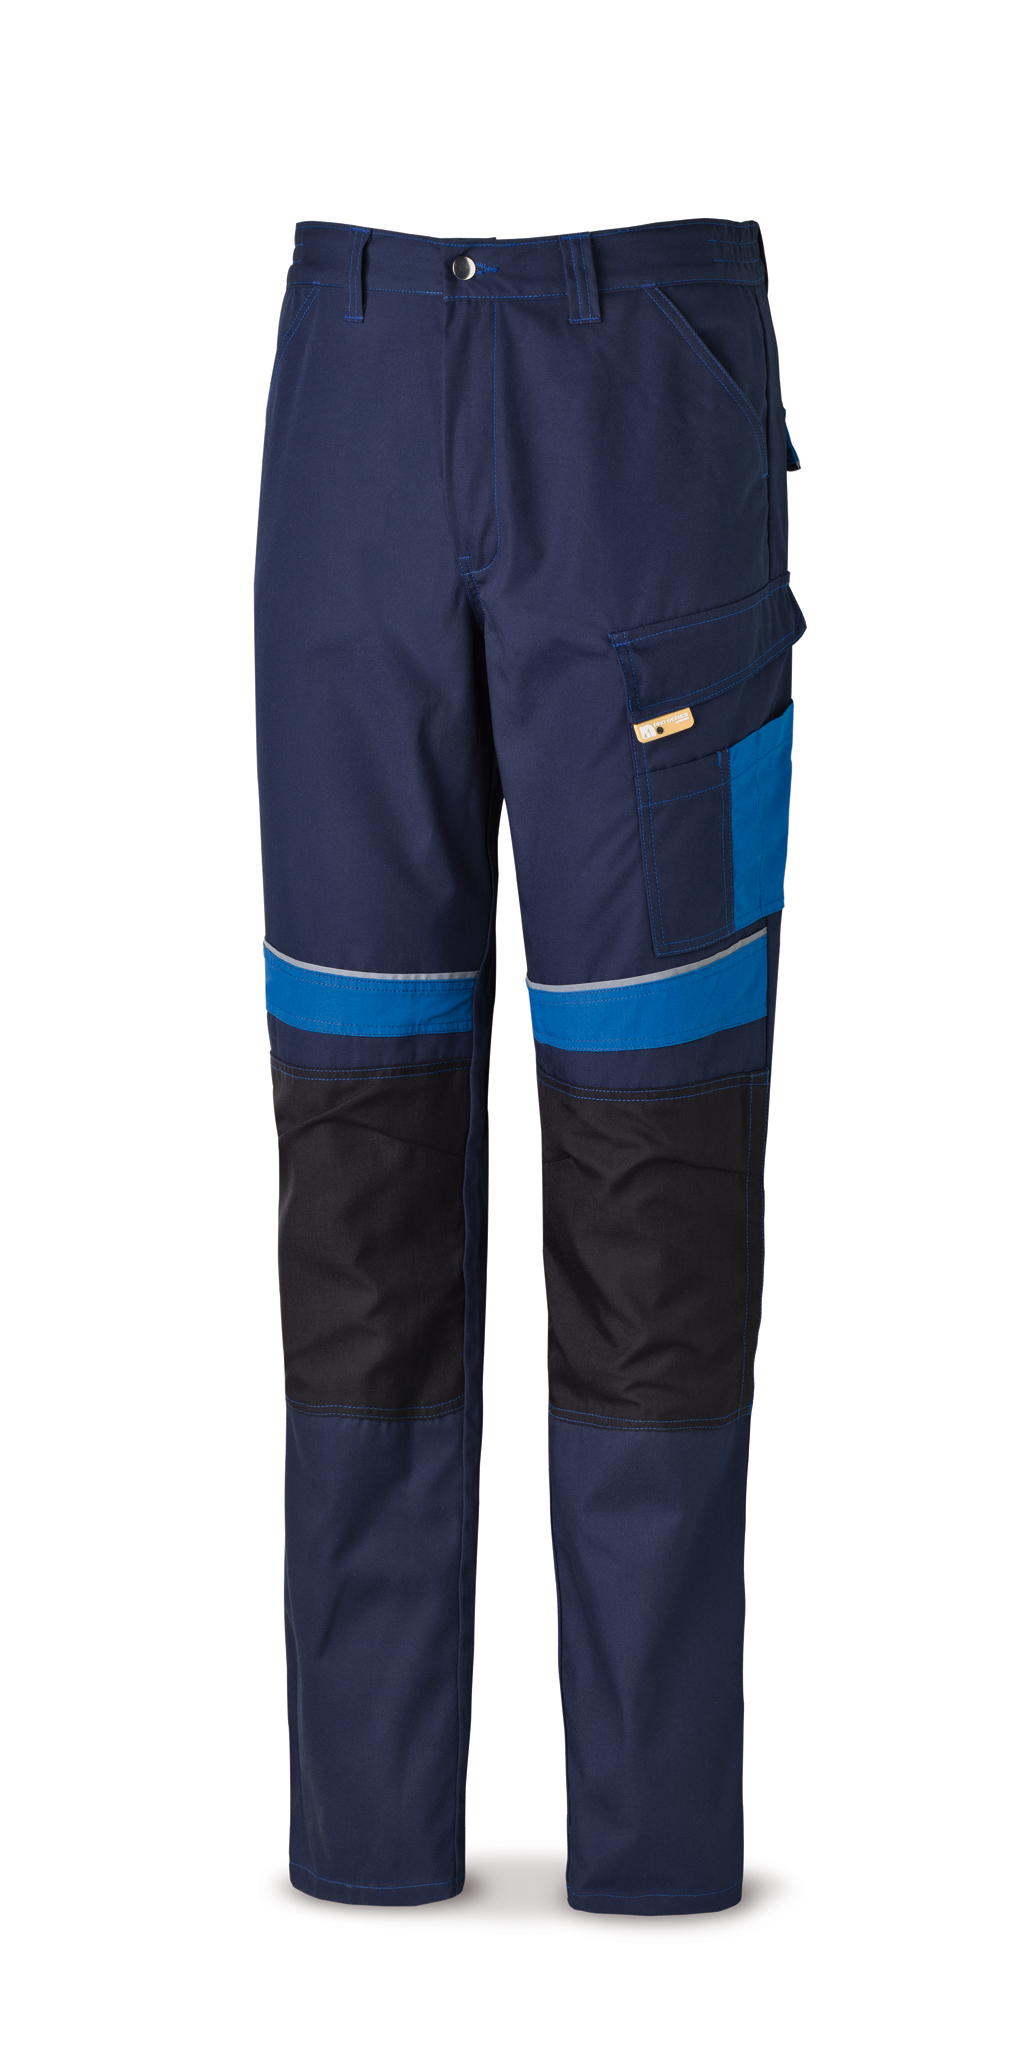 588-PAZA Workwear Pro Series Tergal 245 gr. Canvas trousers. Navy blue/Light blue.